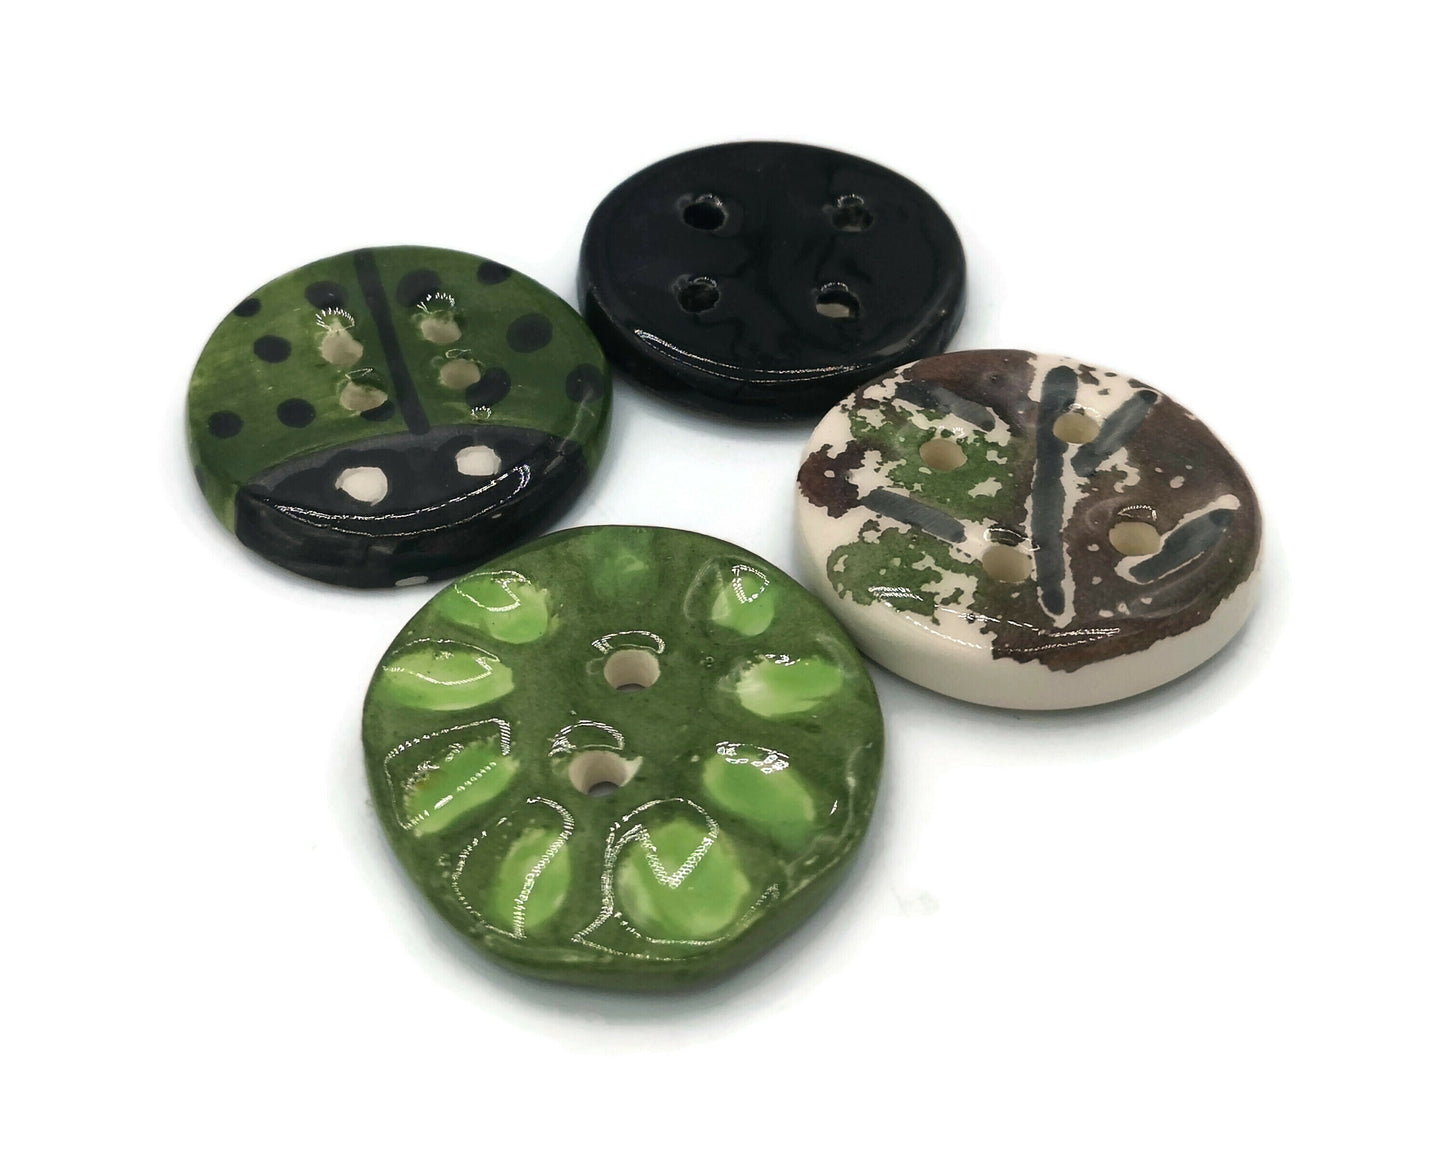 4Pcs Large Green Ceramic Buttons Hand Painted, Decorative Flat Sewing Buttons, Handmade Clay Buttons Round Shape 4 Holes, Best Sellers - Ceramica Ana Rafael